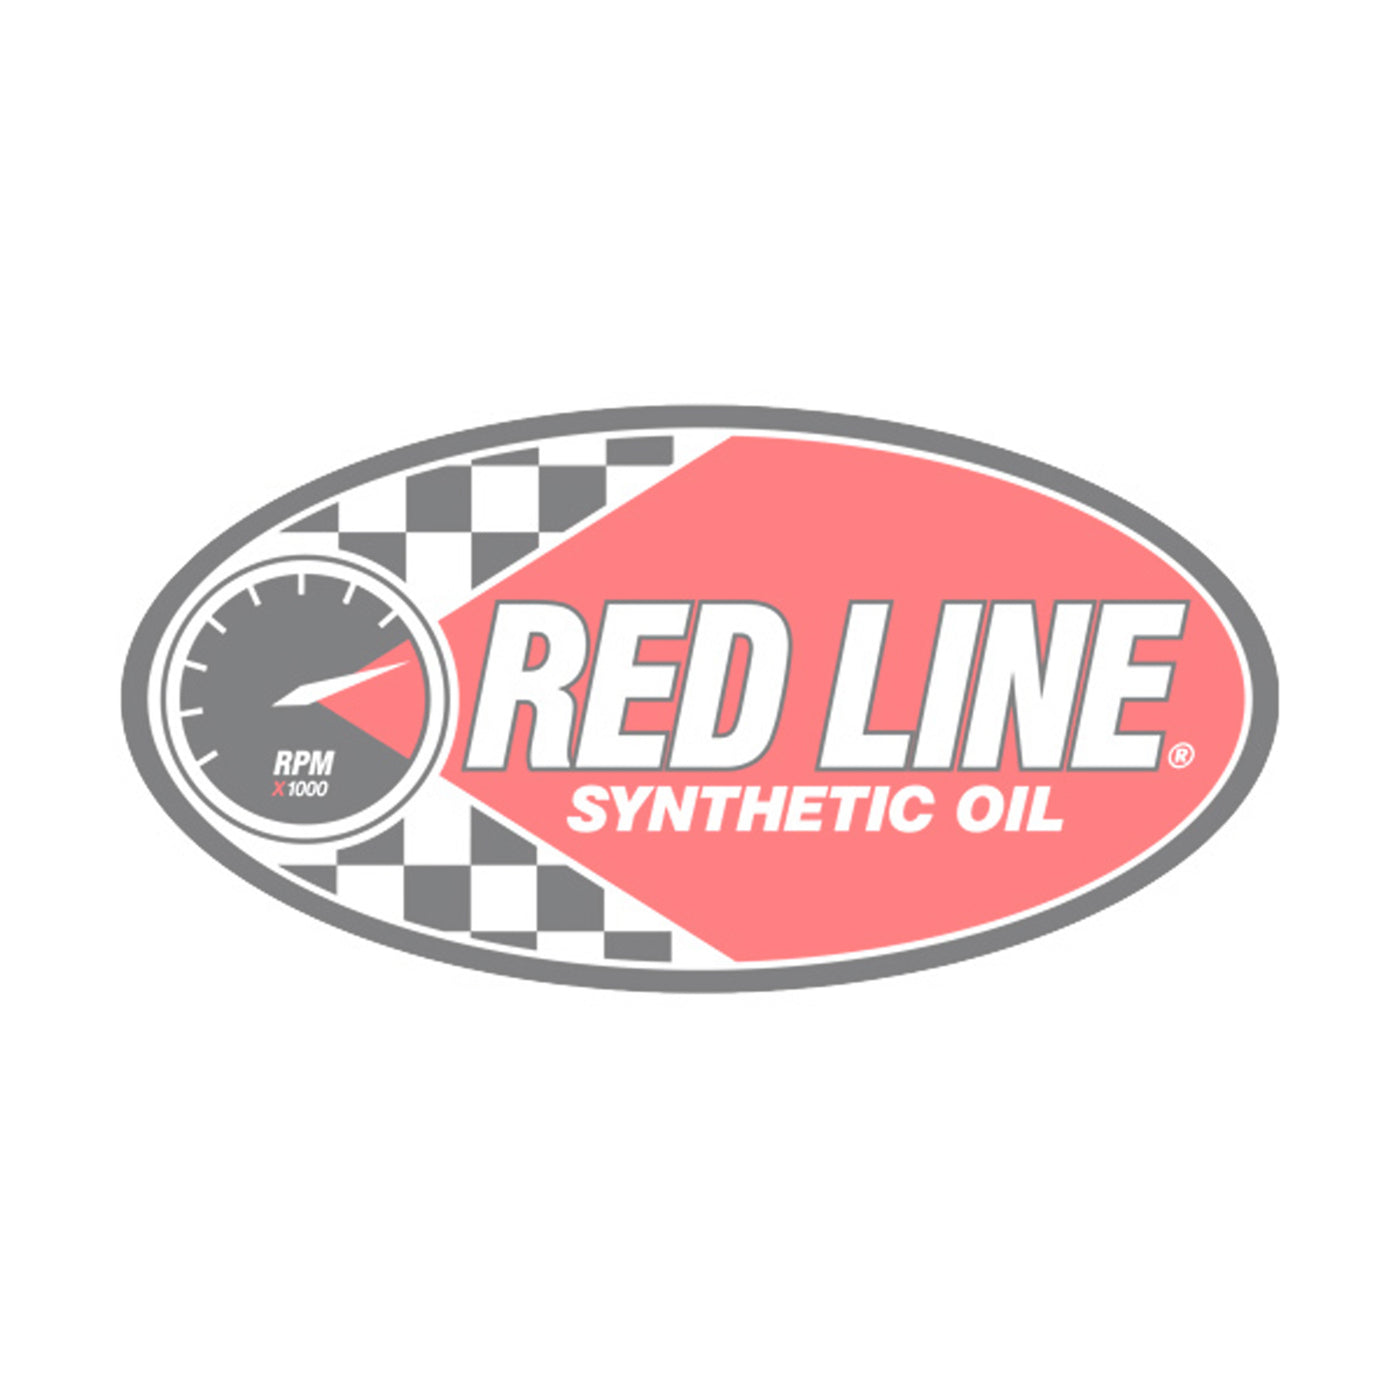 Red Line Suspension Fluid LikeWater (1.5WT)